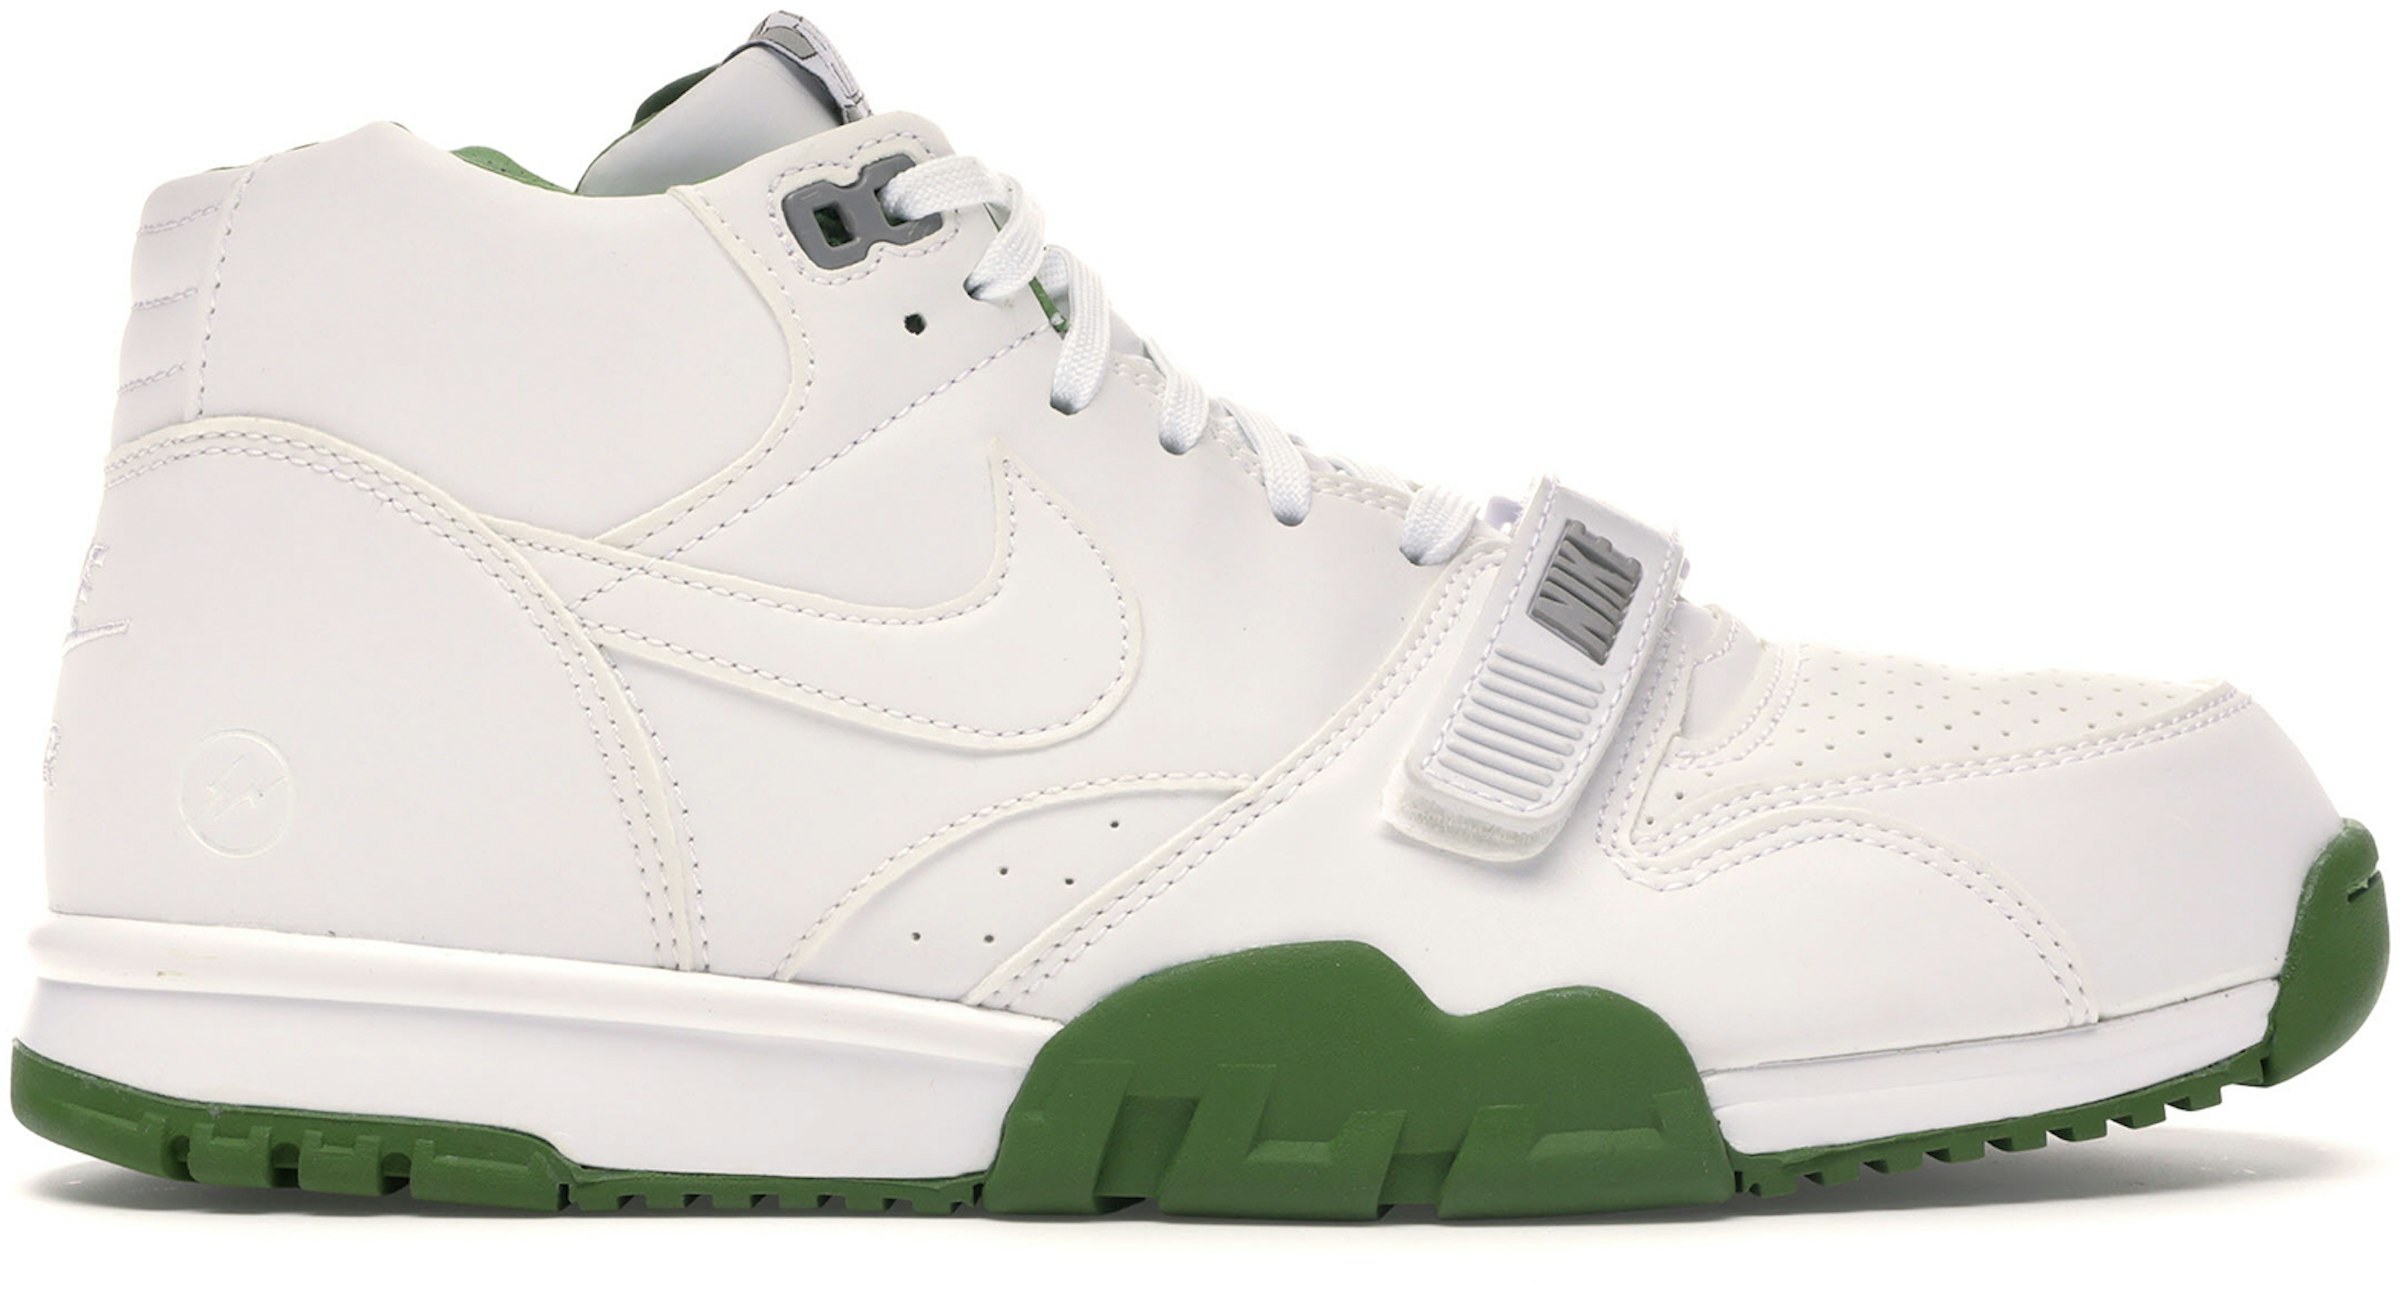 hecho Fabricación orden Nike Air Trainer 1 Fragment White Chlorophyll Men's - 806942-113 - US